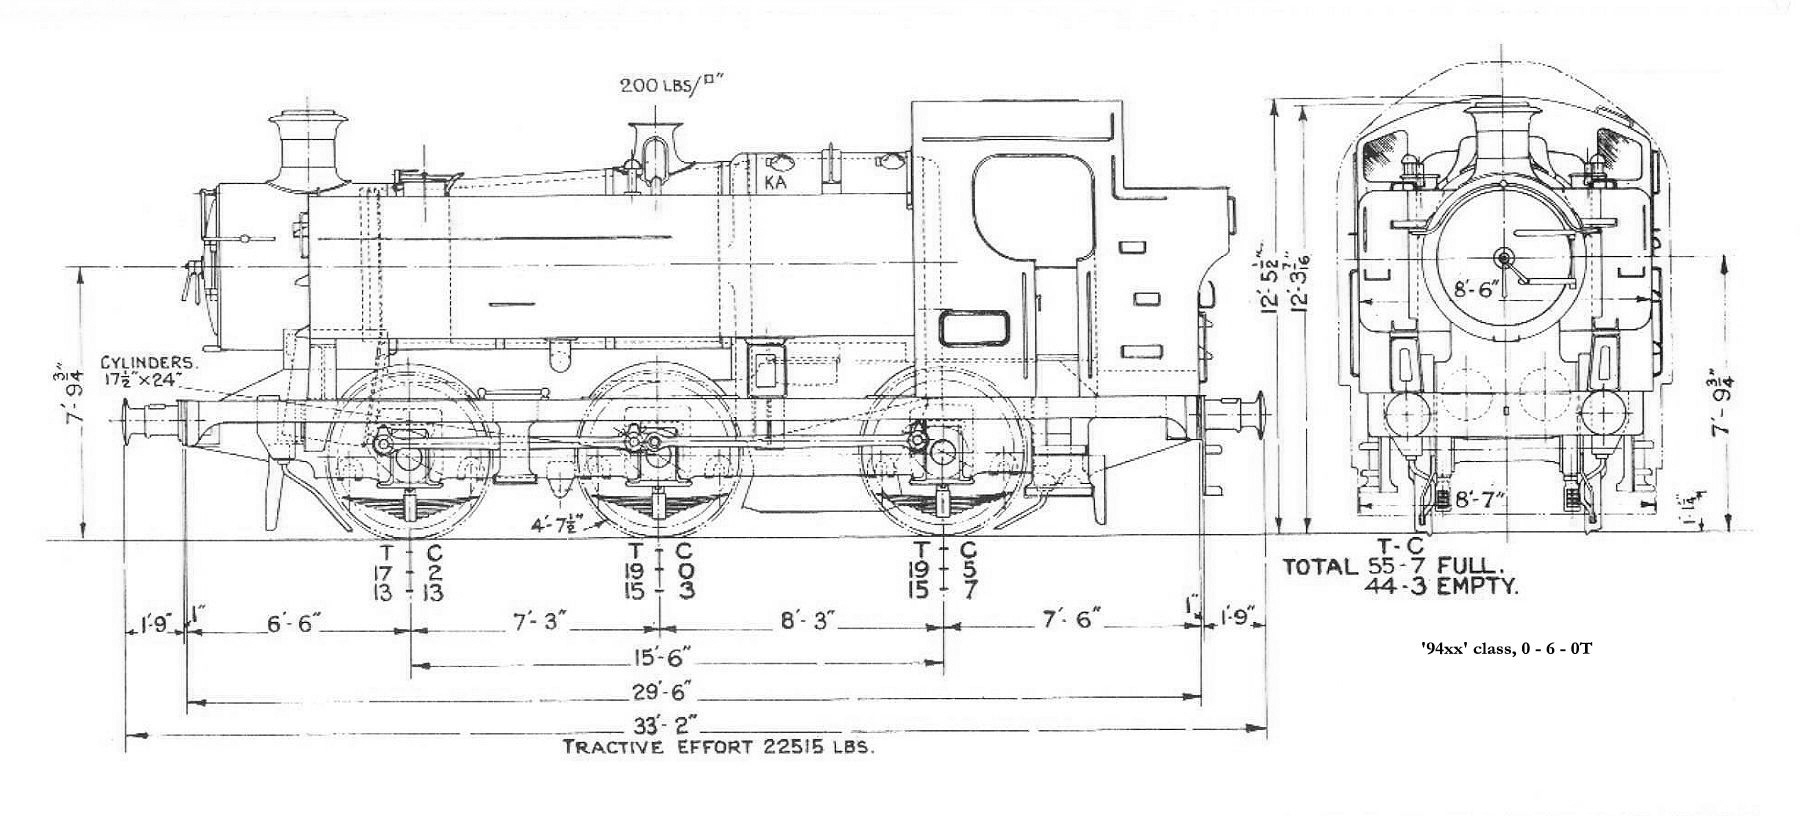 Train Engineering Drawing Pictures